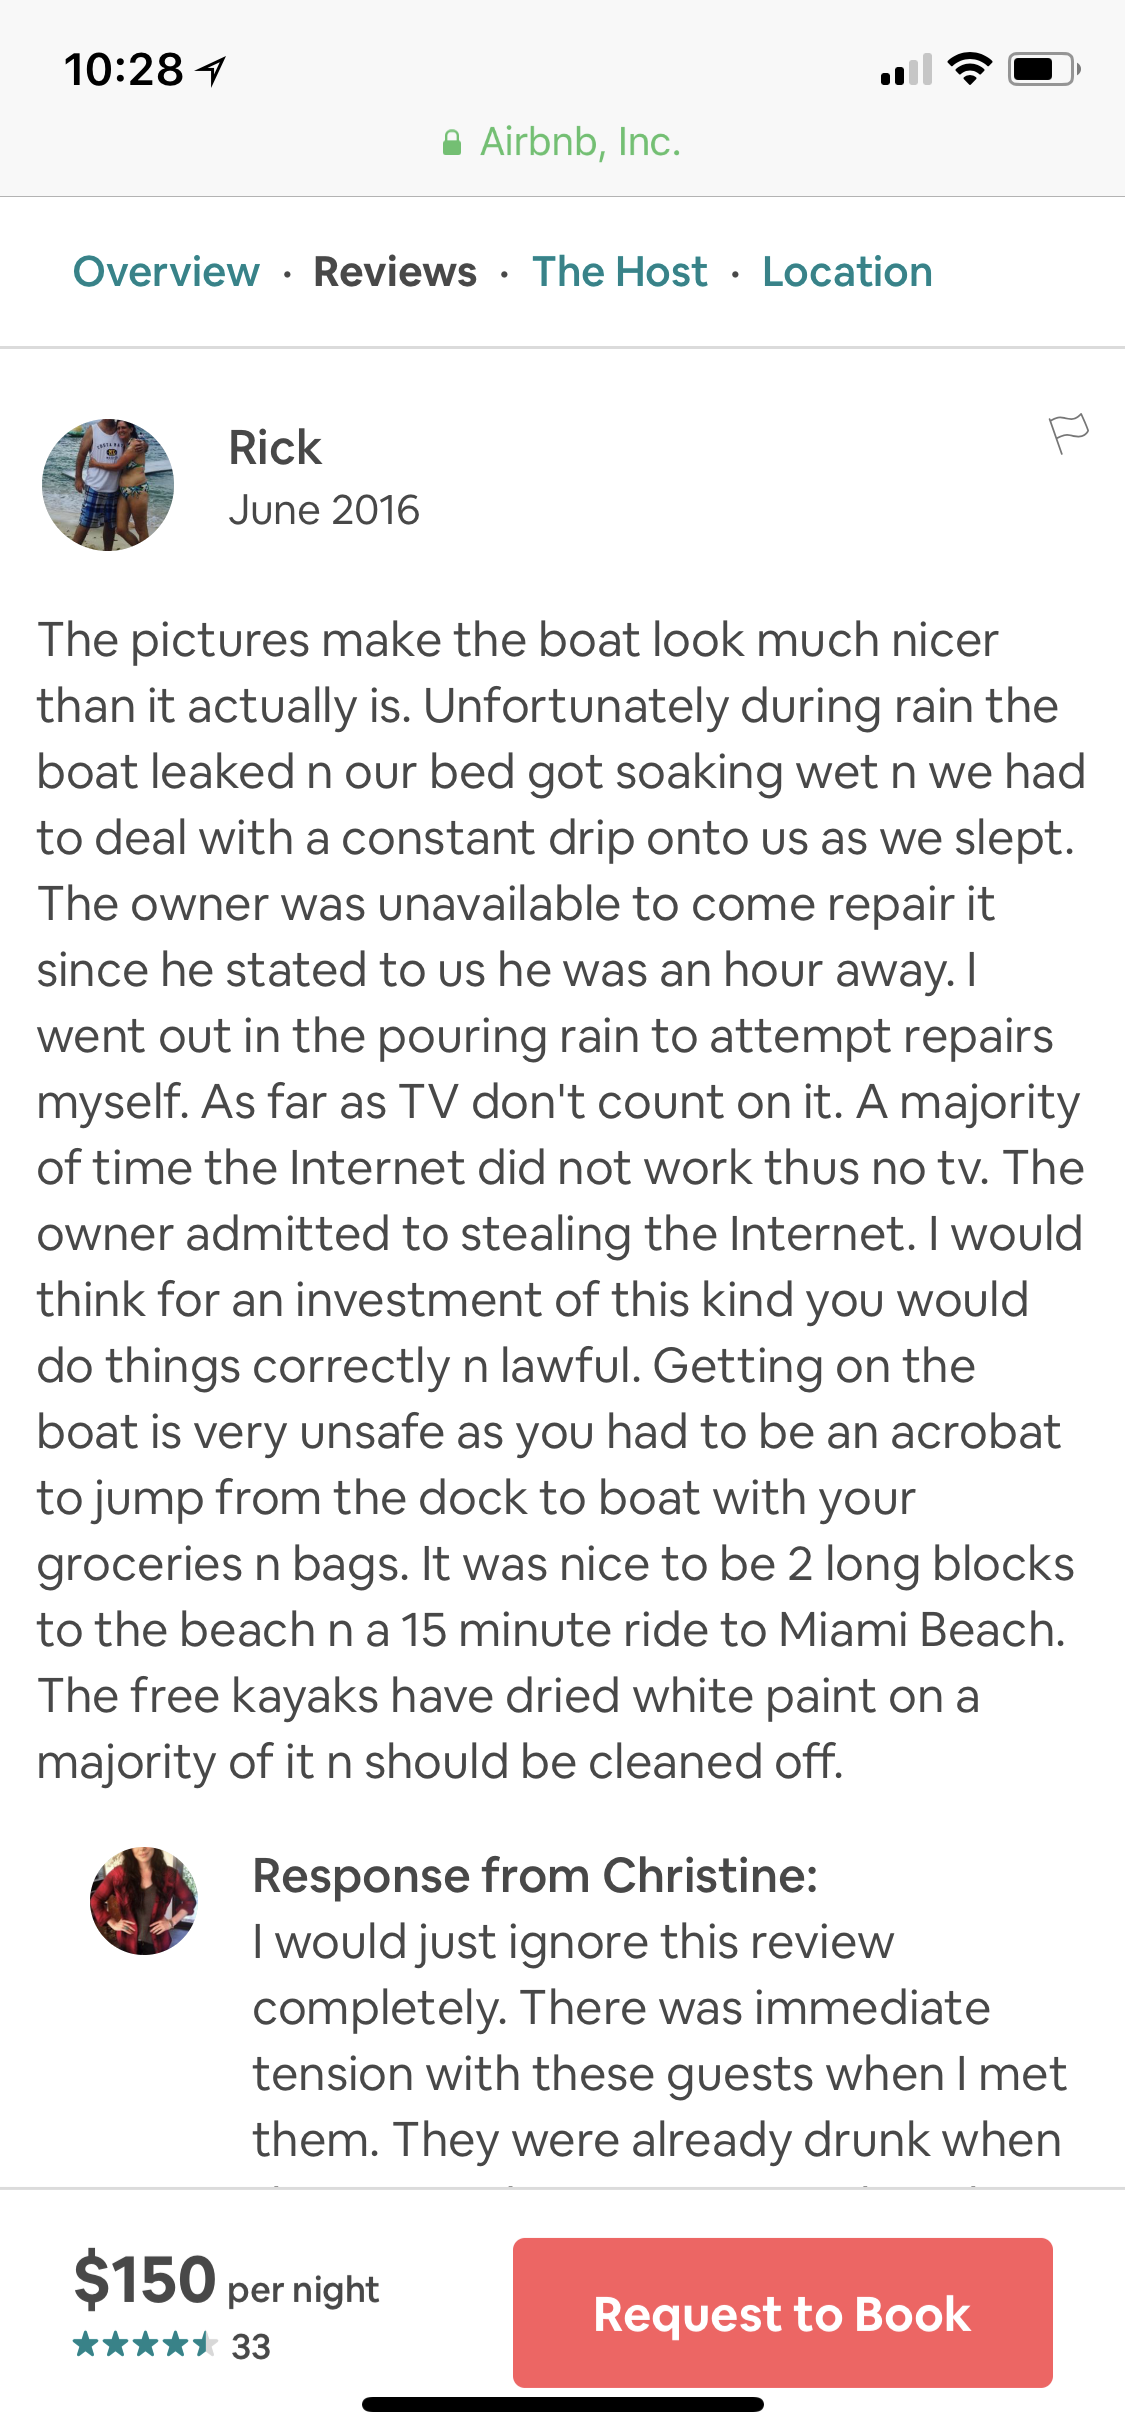 AIRBNB REVIEW FROM SOMEONE ELSE